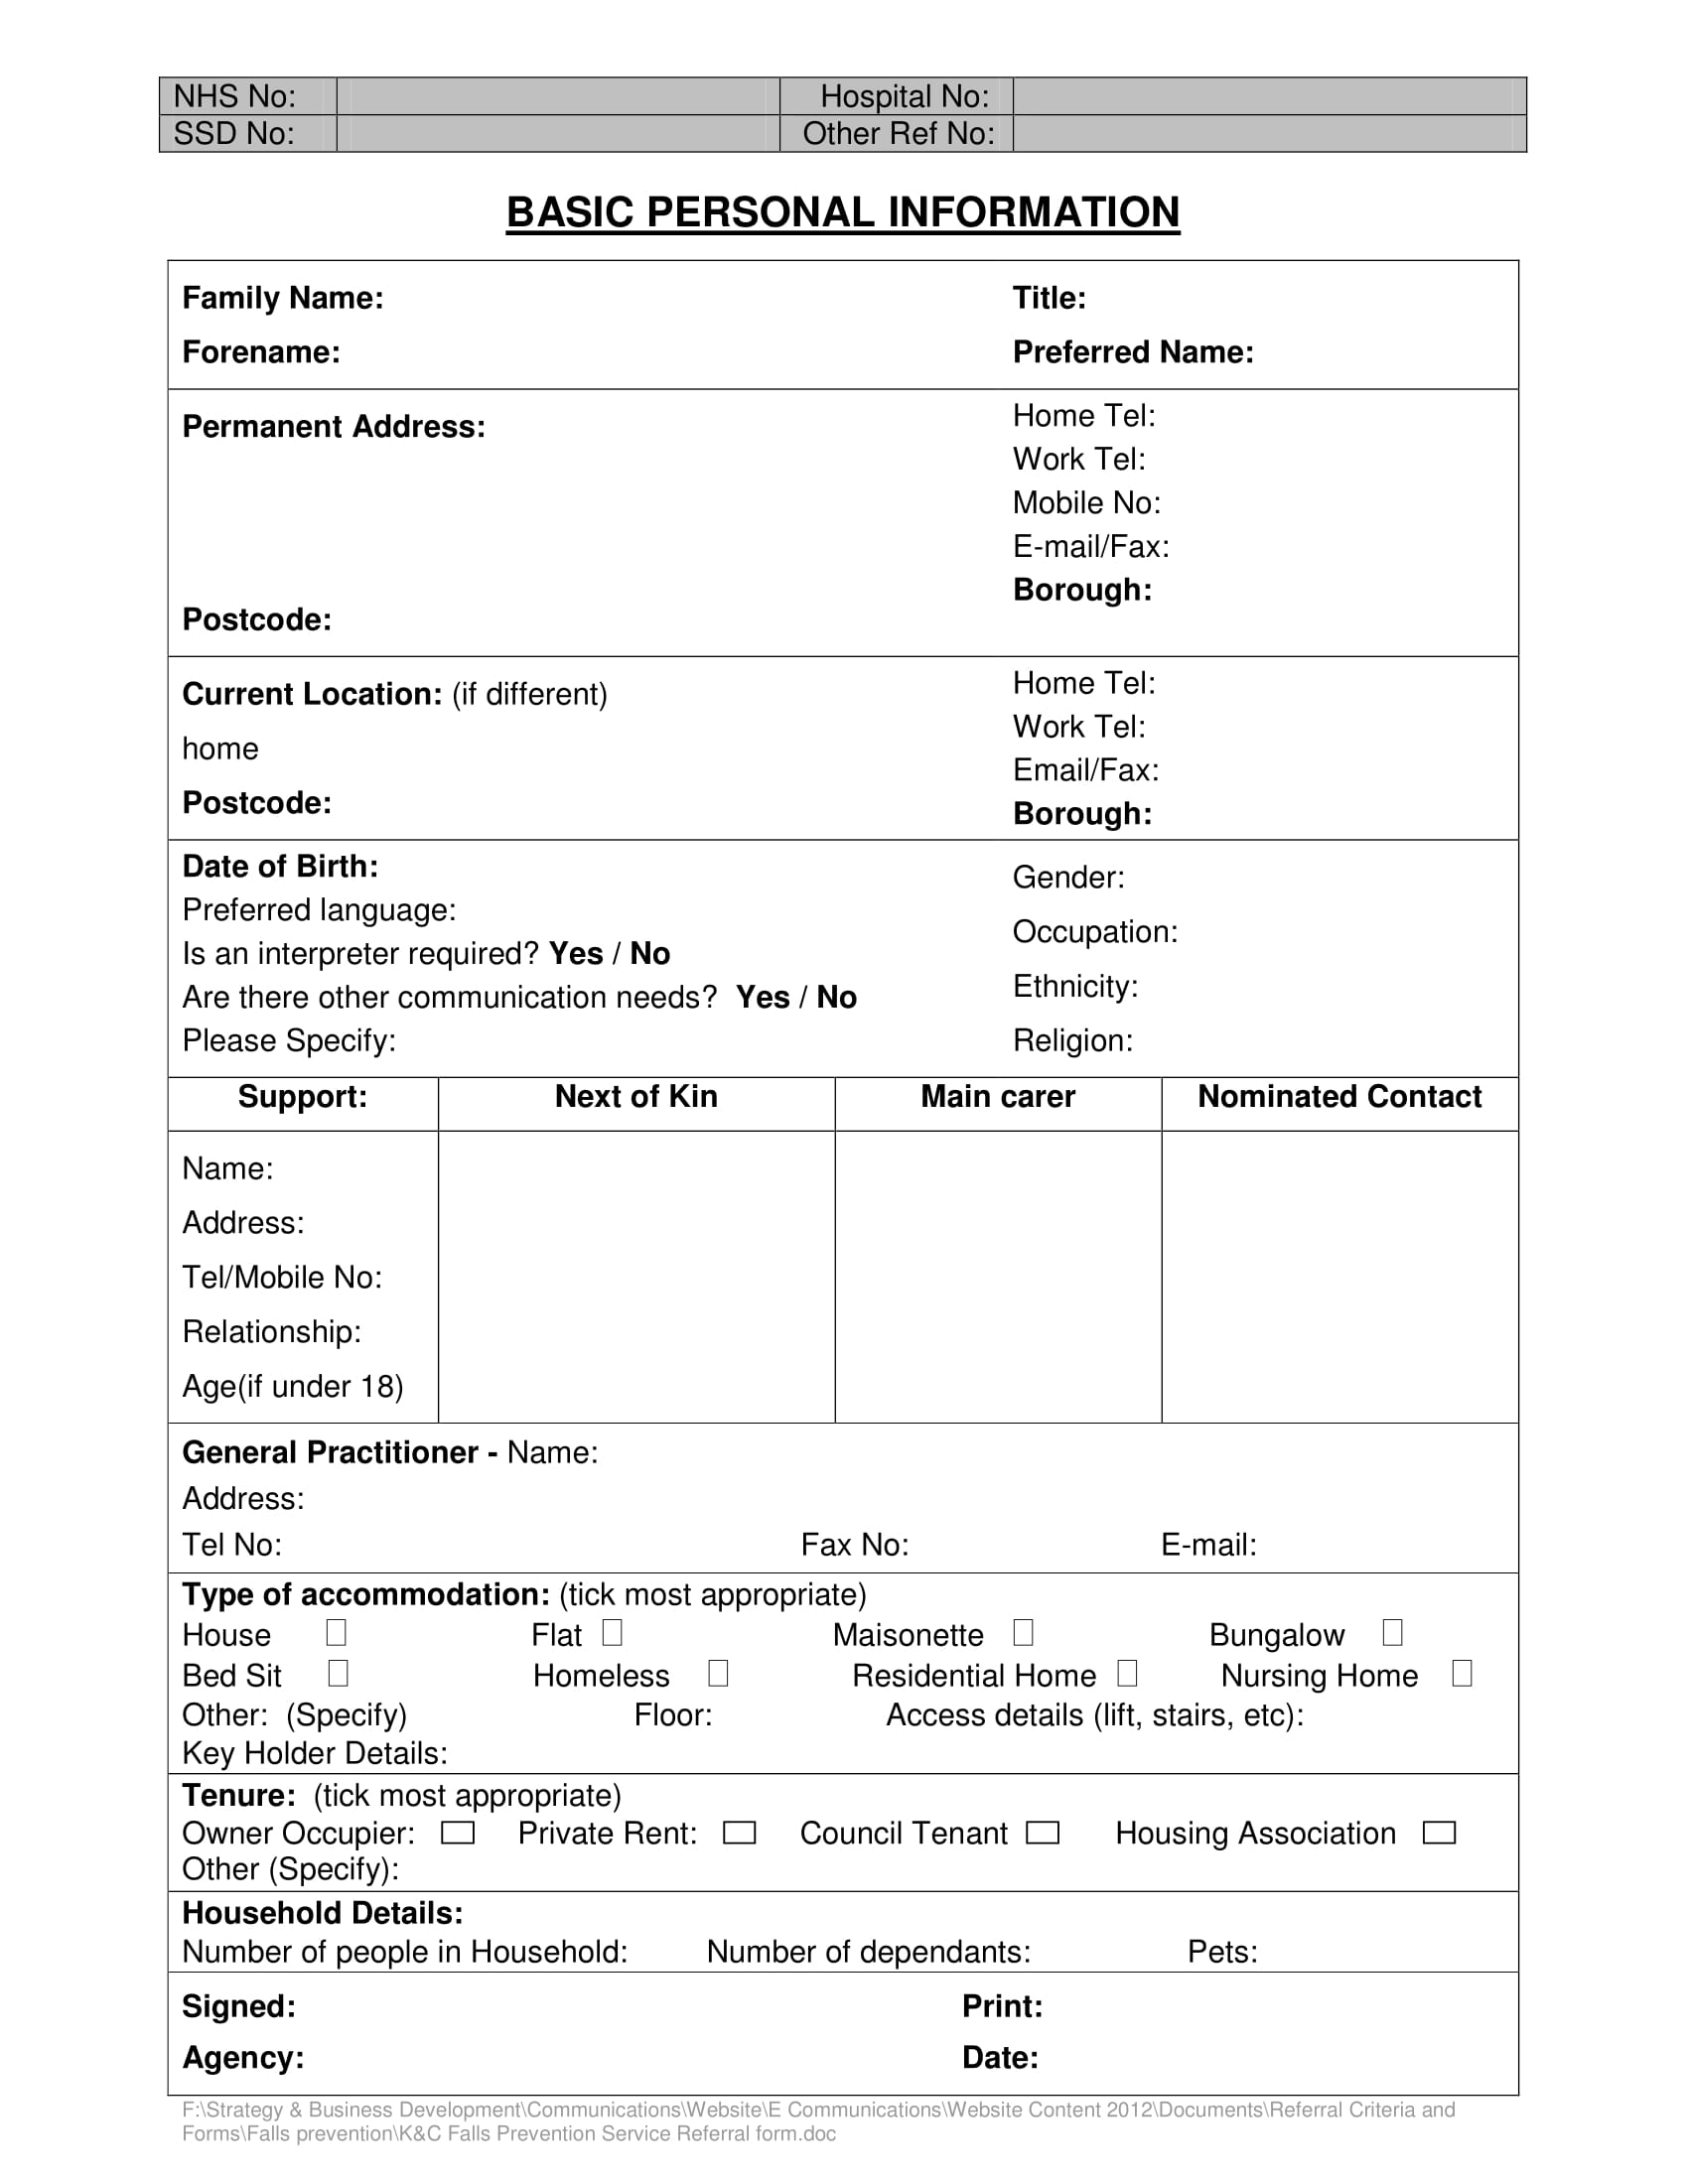 basic personal information form 1